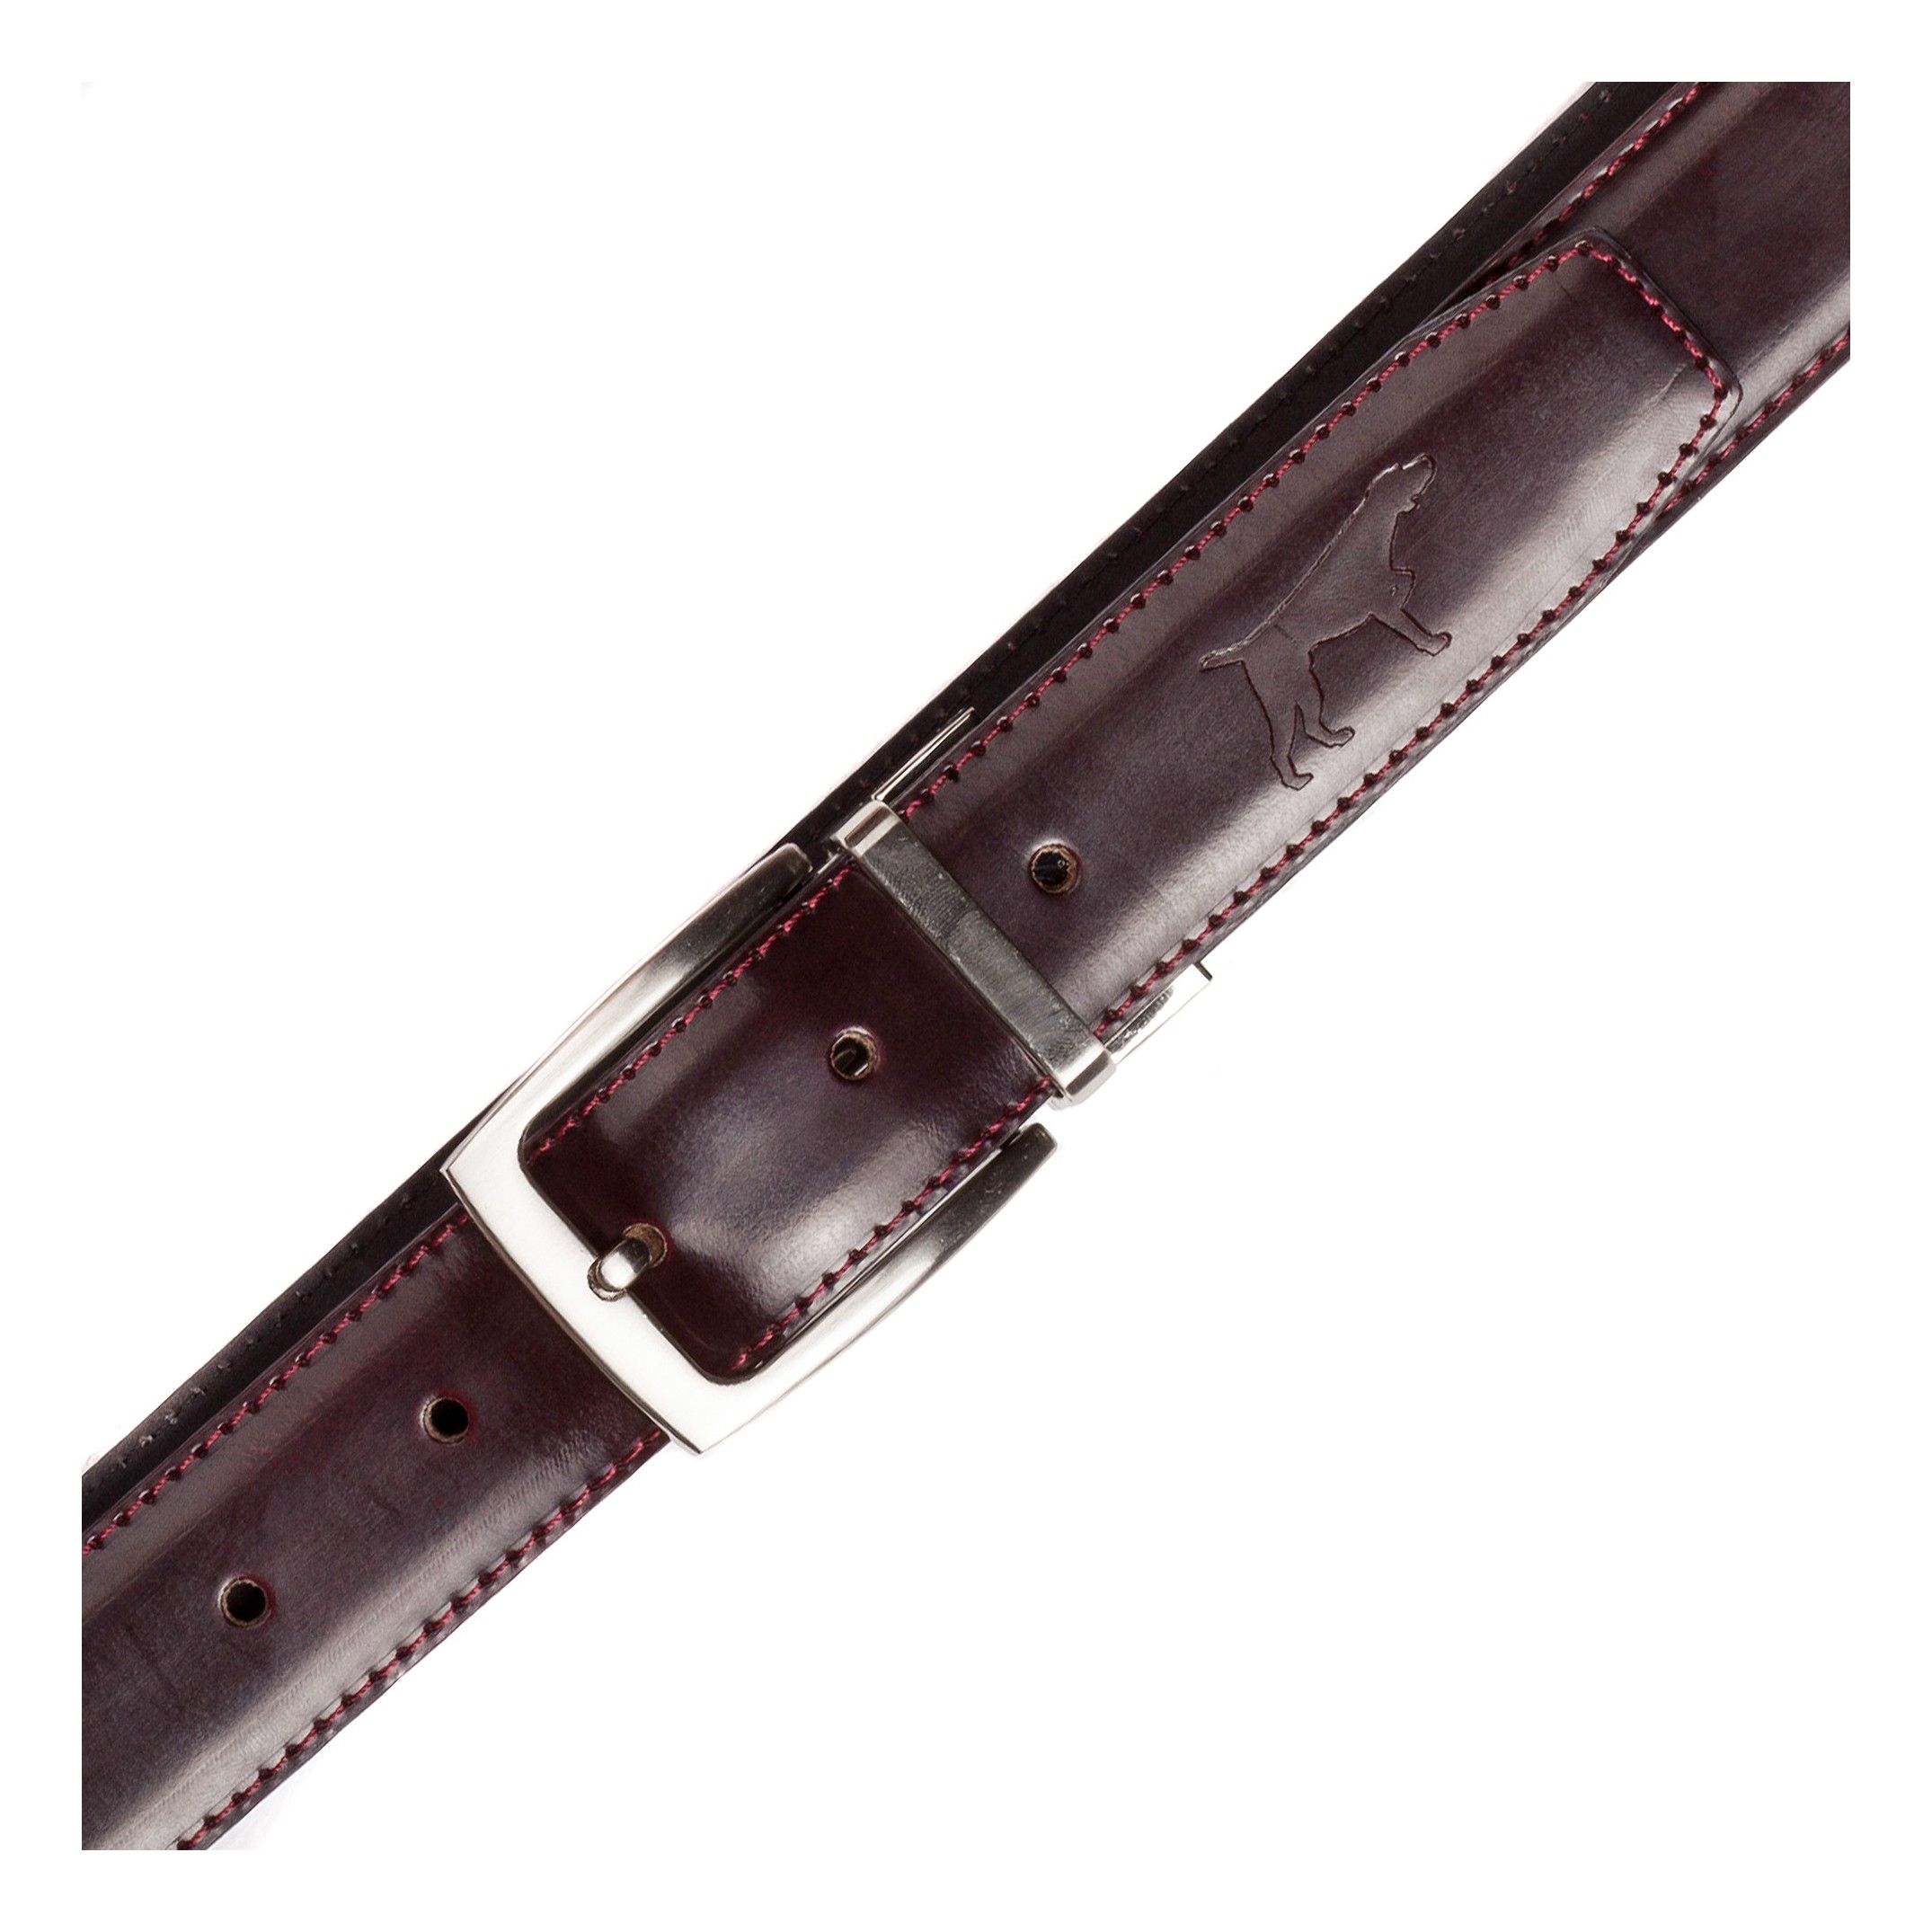 Adjustable belt. Florentic leather. Removable metal buckle to adapt the belt. Width of 3,3 cm. Large of 100 cm & 115 cm. Burgundy color. Classic style.